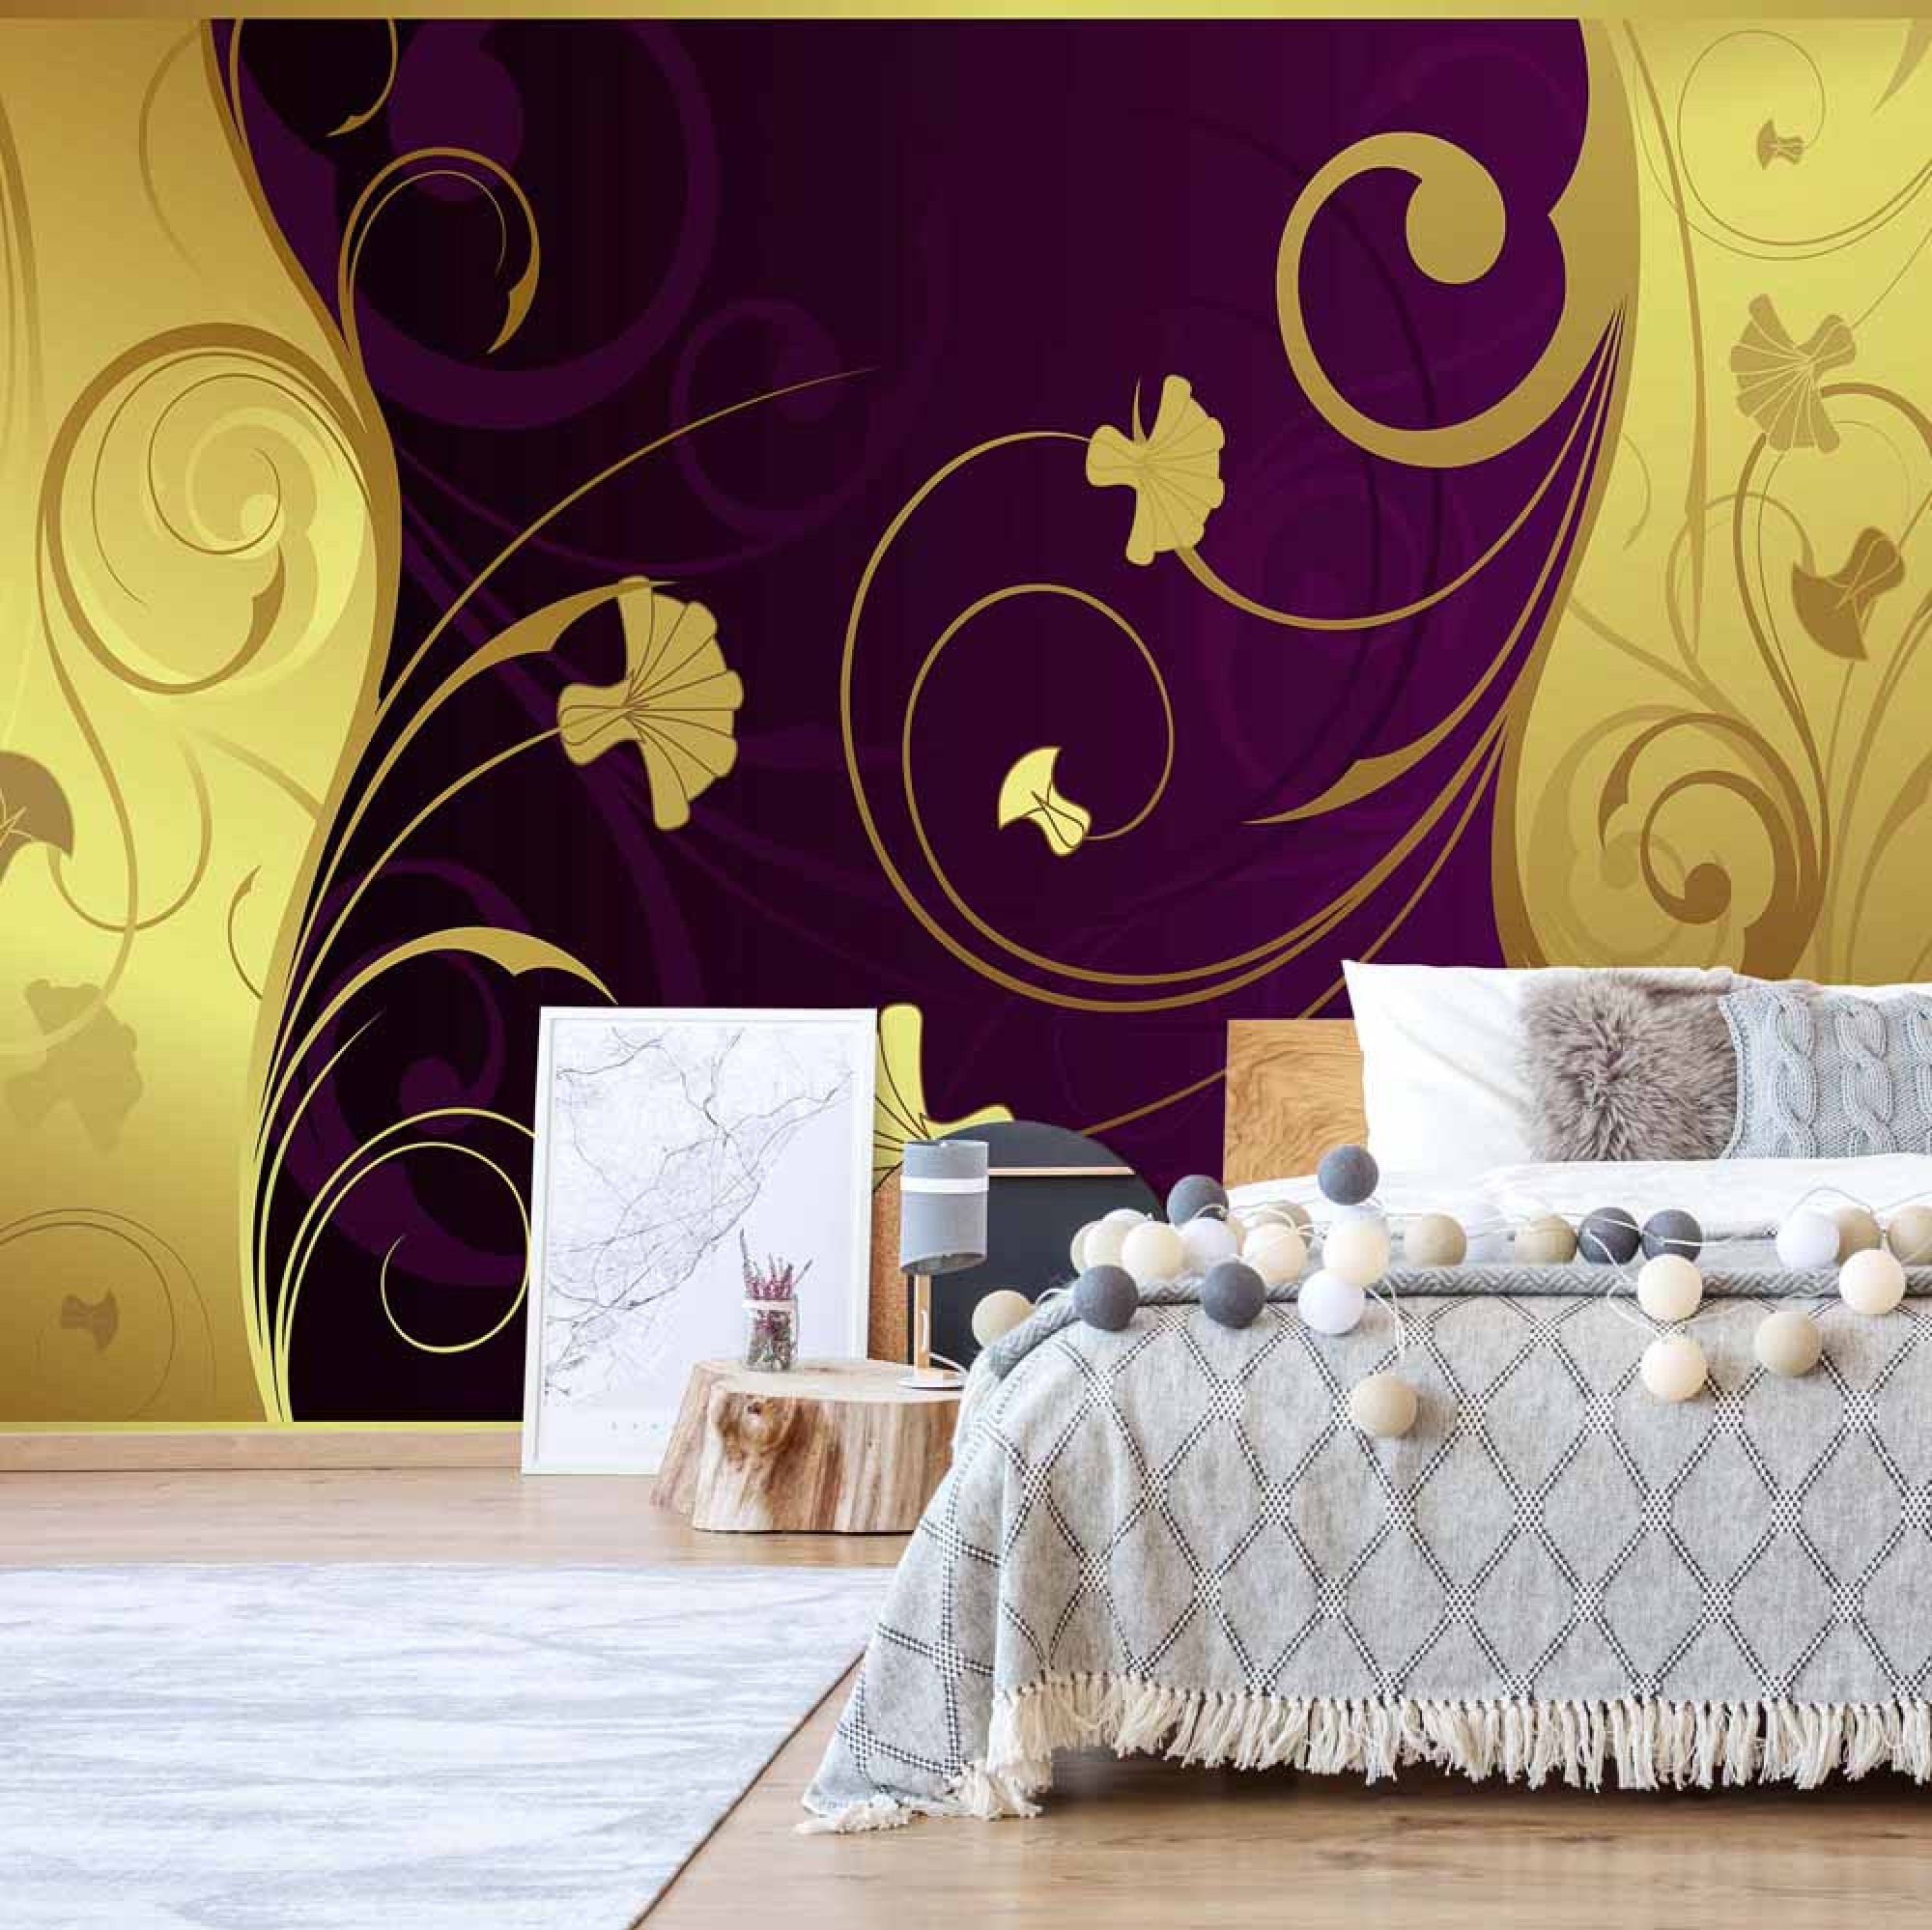 Luxury Gold And Purple Floral Swirl Design - Mural On Bedroom Wall - HD Wallpaper 